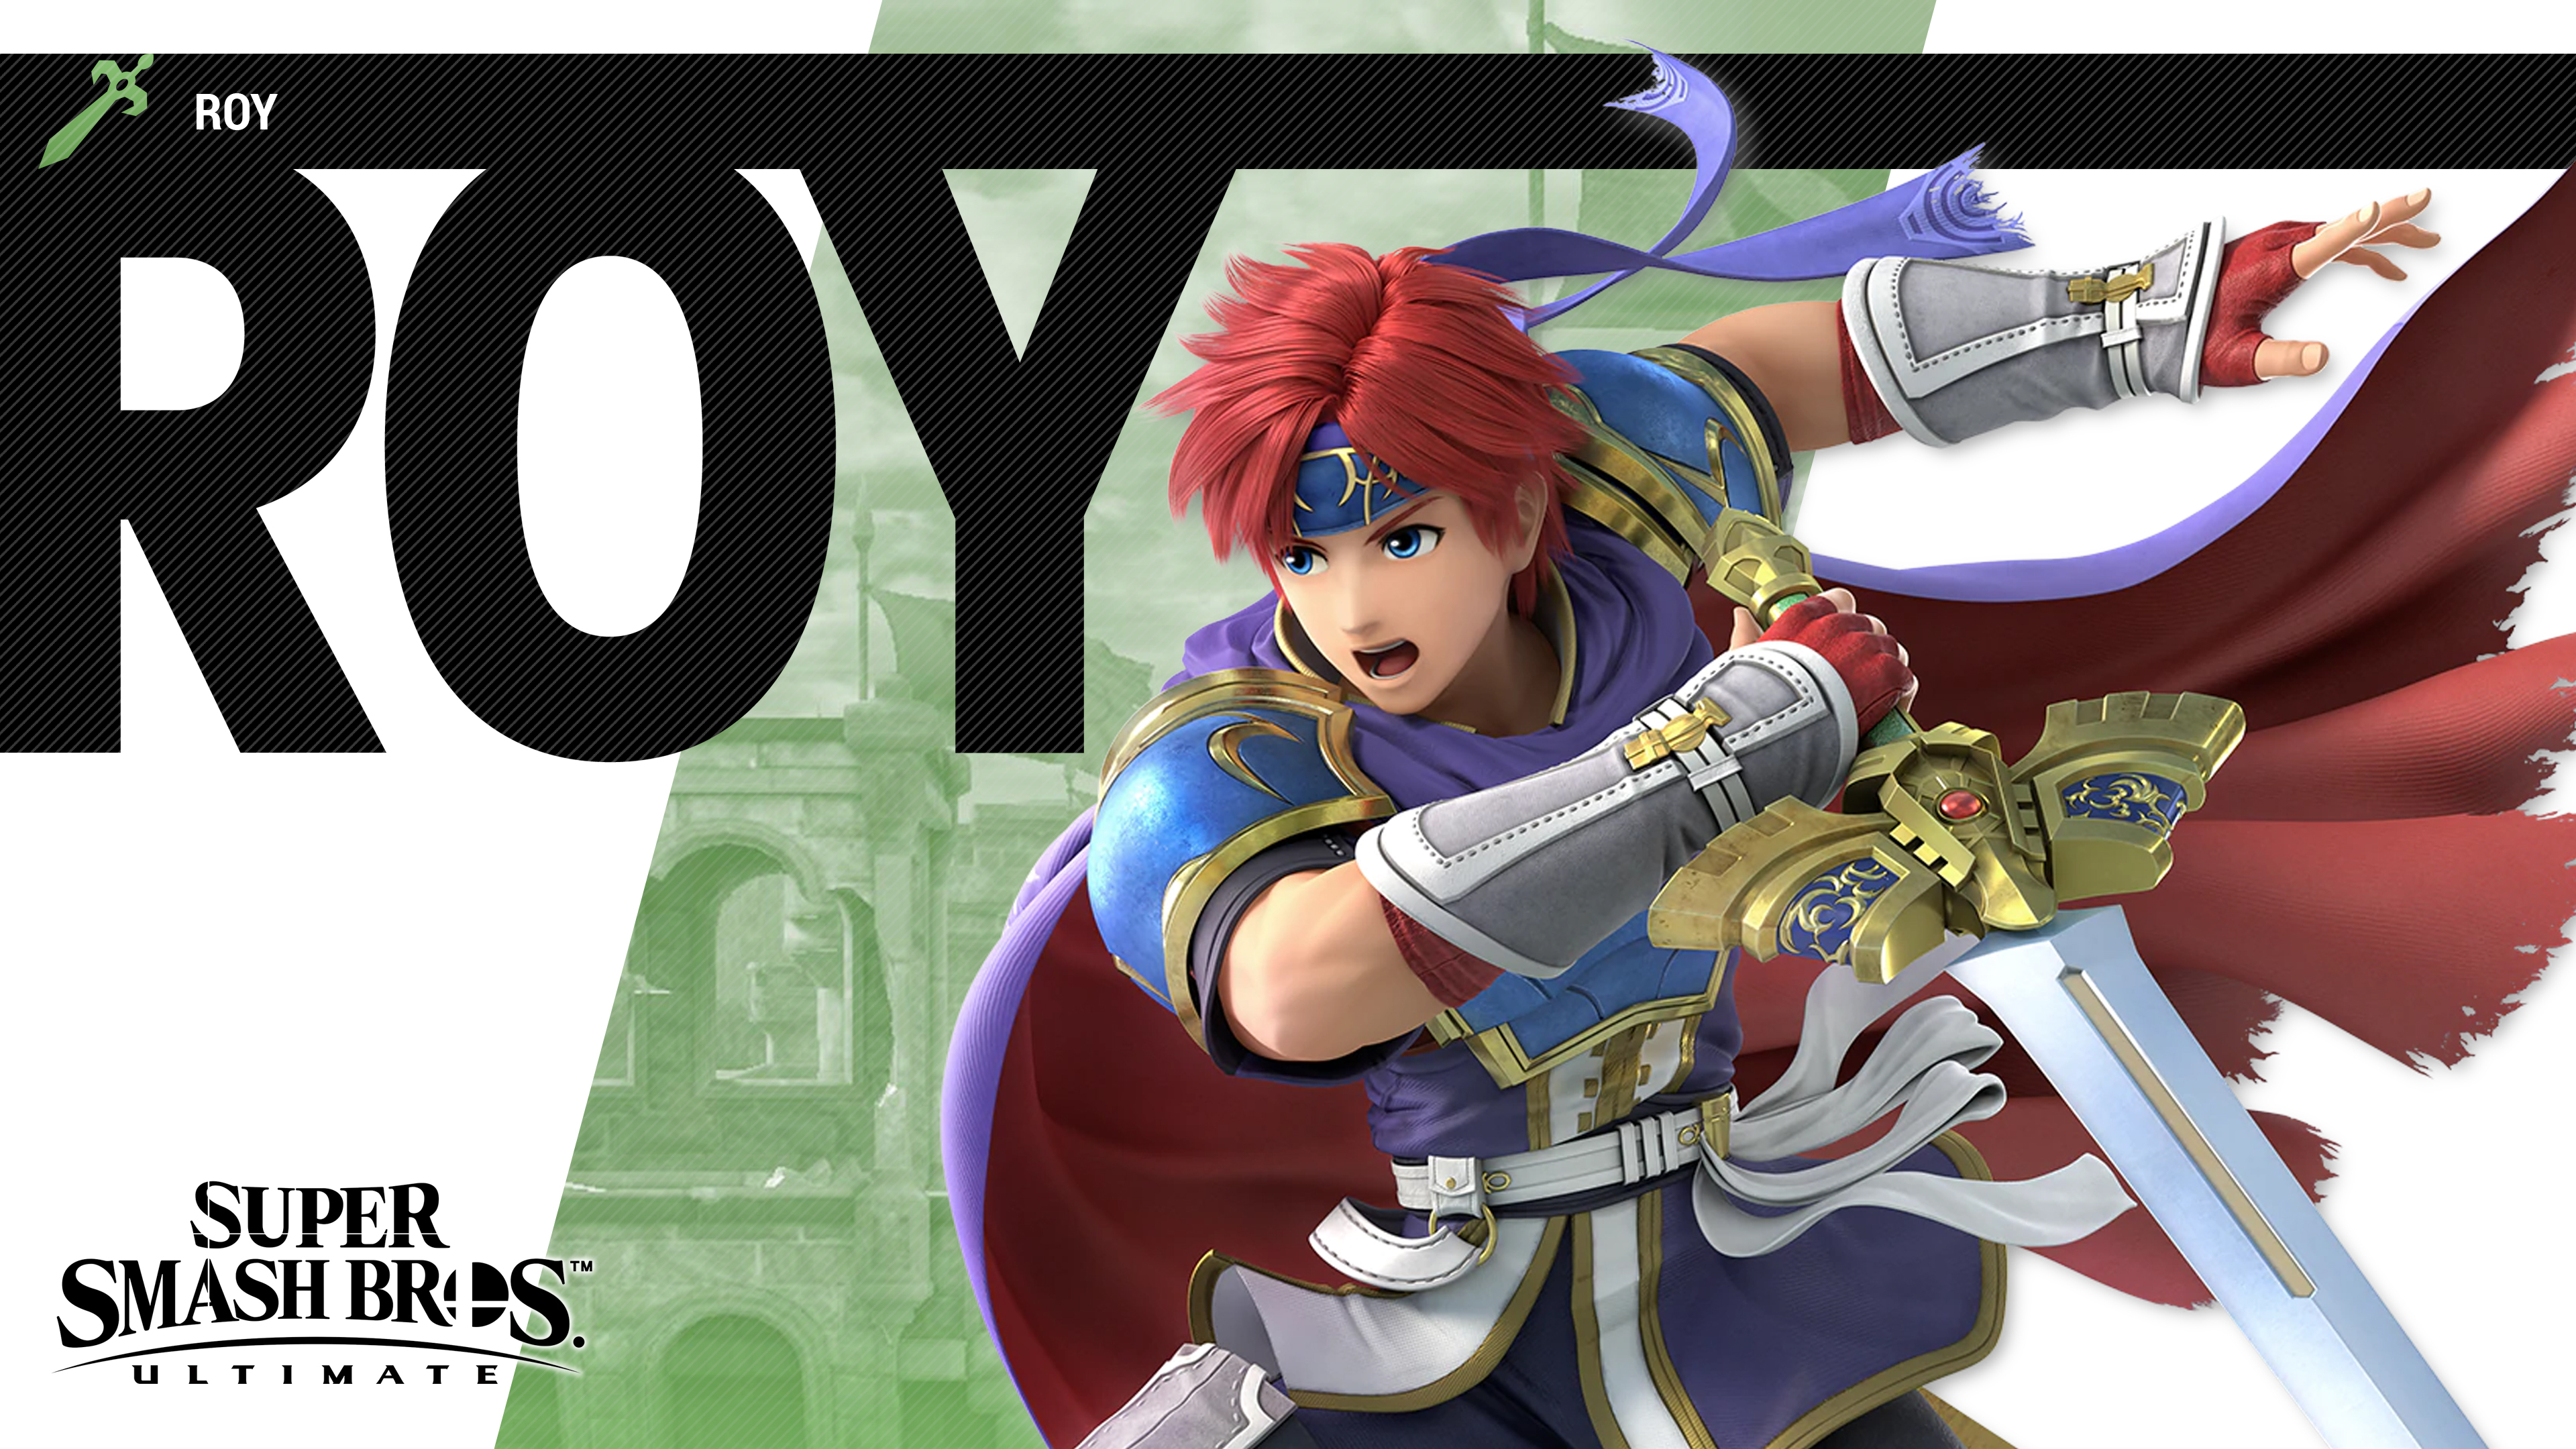 3840x2160 Super Smash Bros Ultimate Roy Wallpapers Cat with Monocle